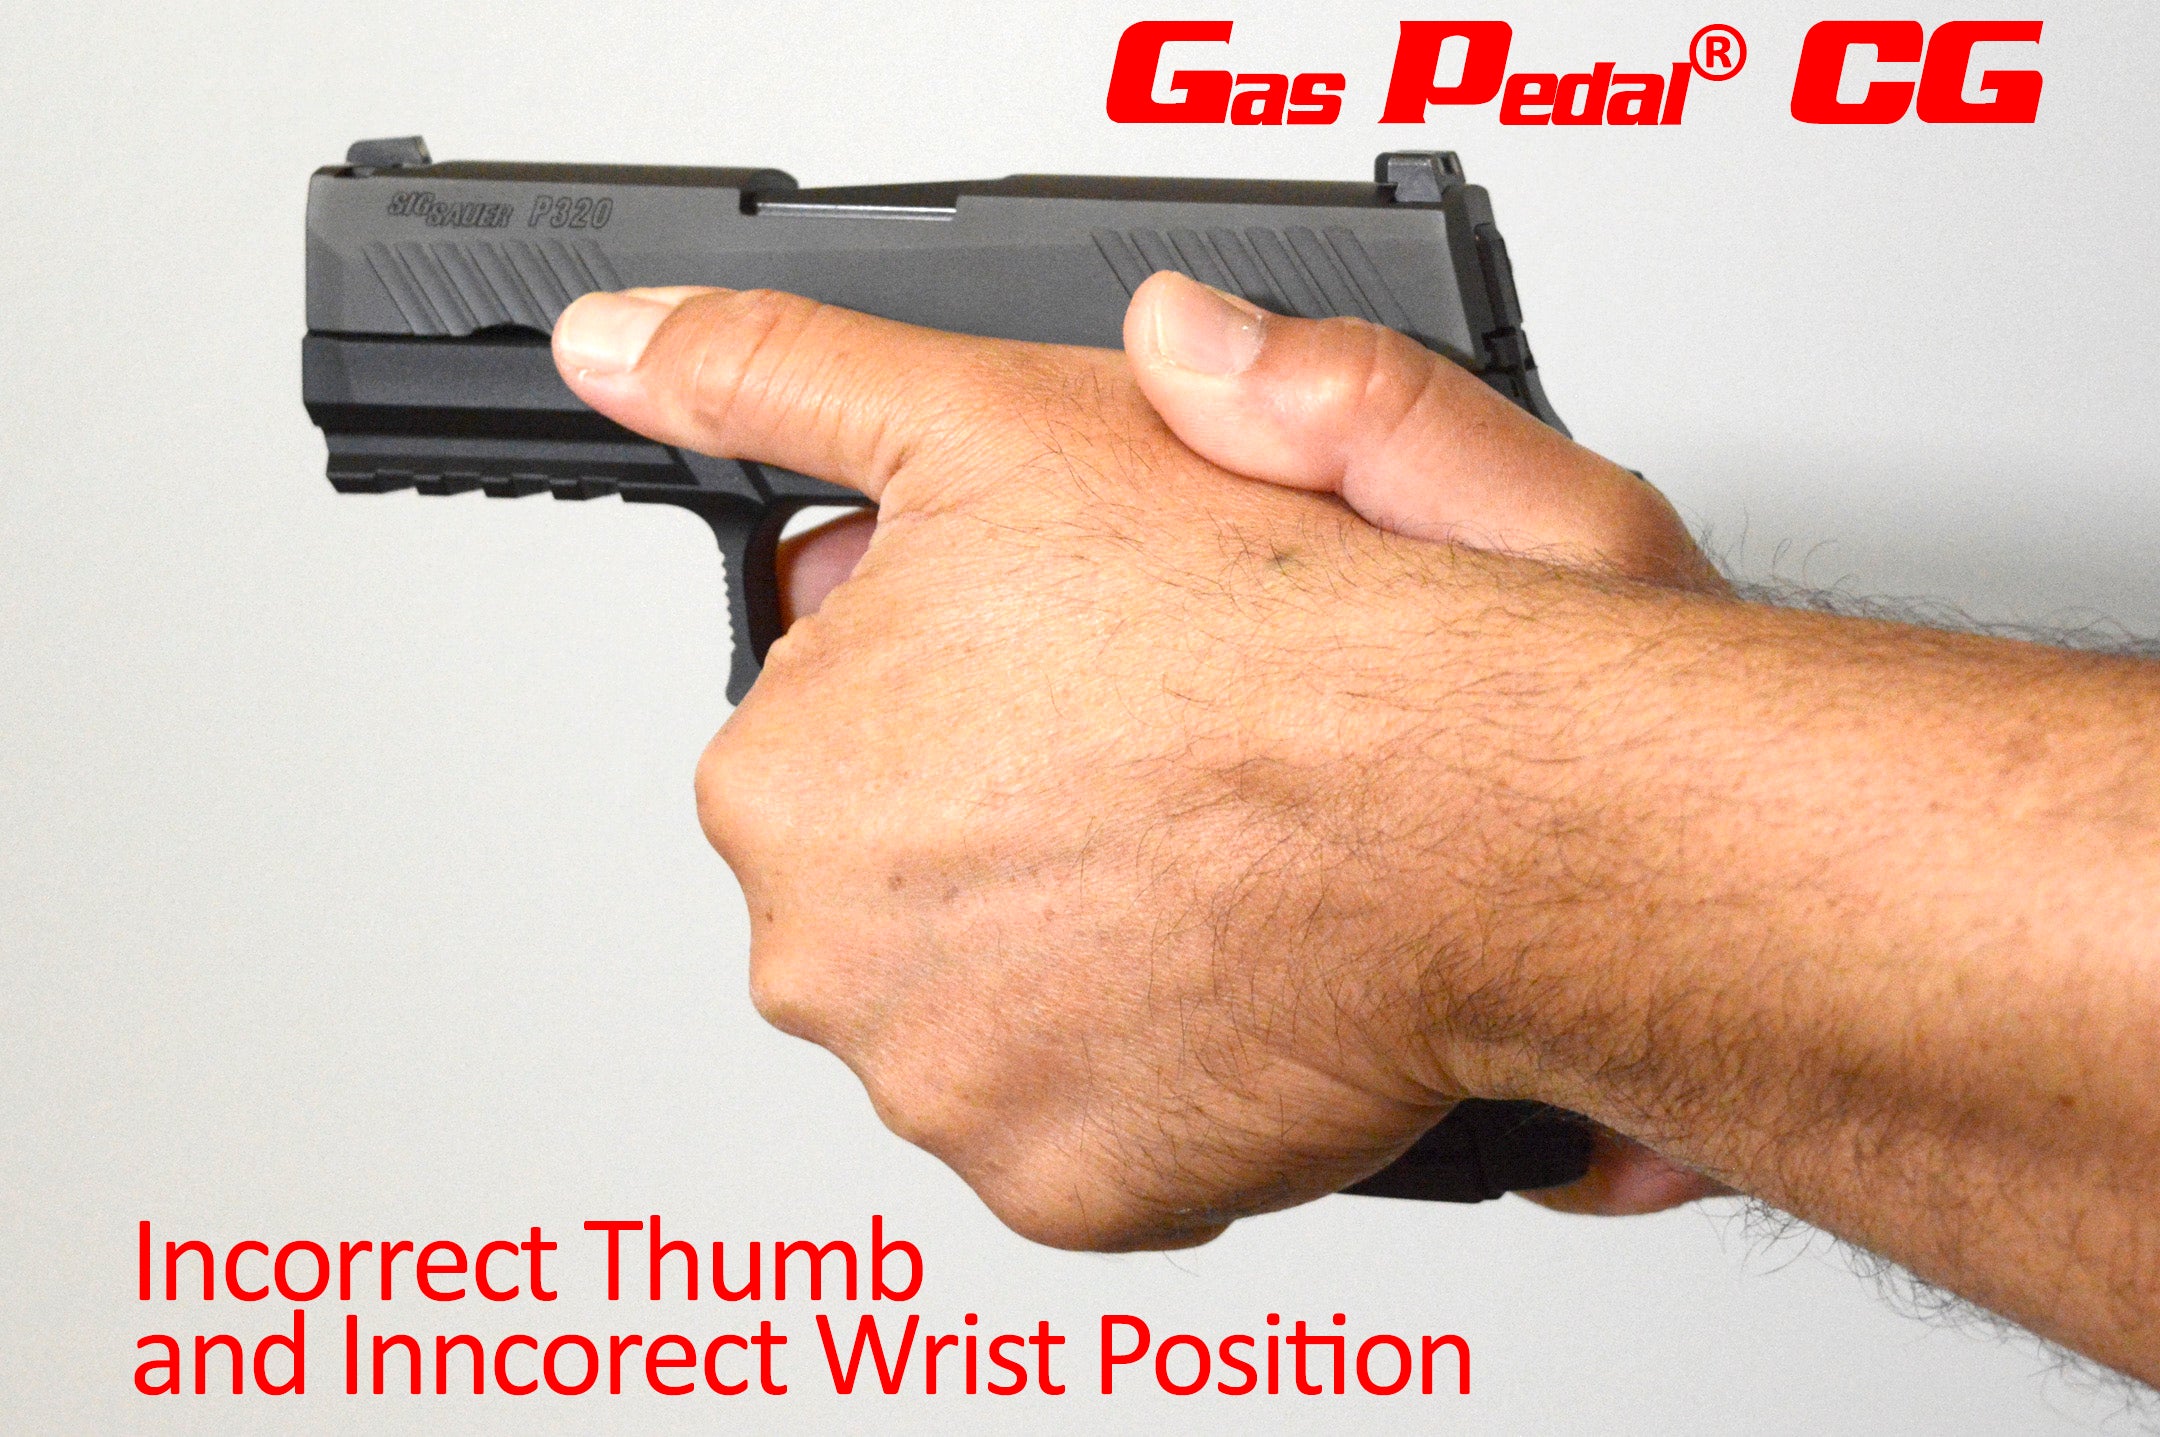  Gas Pedal Opposable Grip Thumb rest on Sig P320